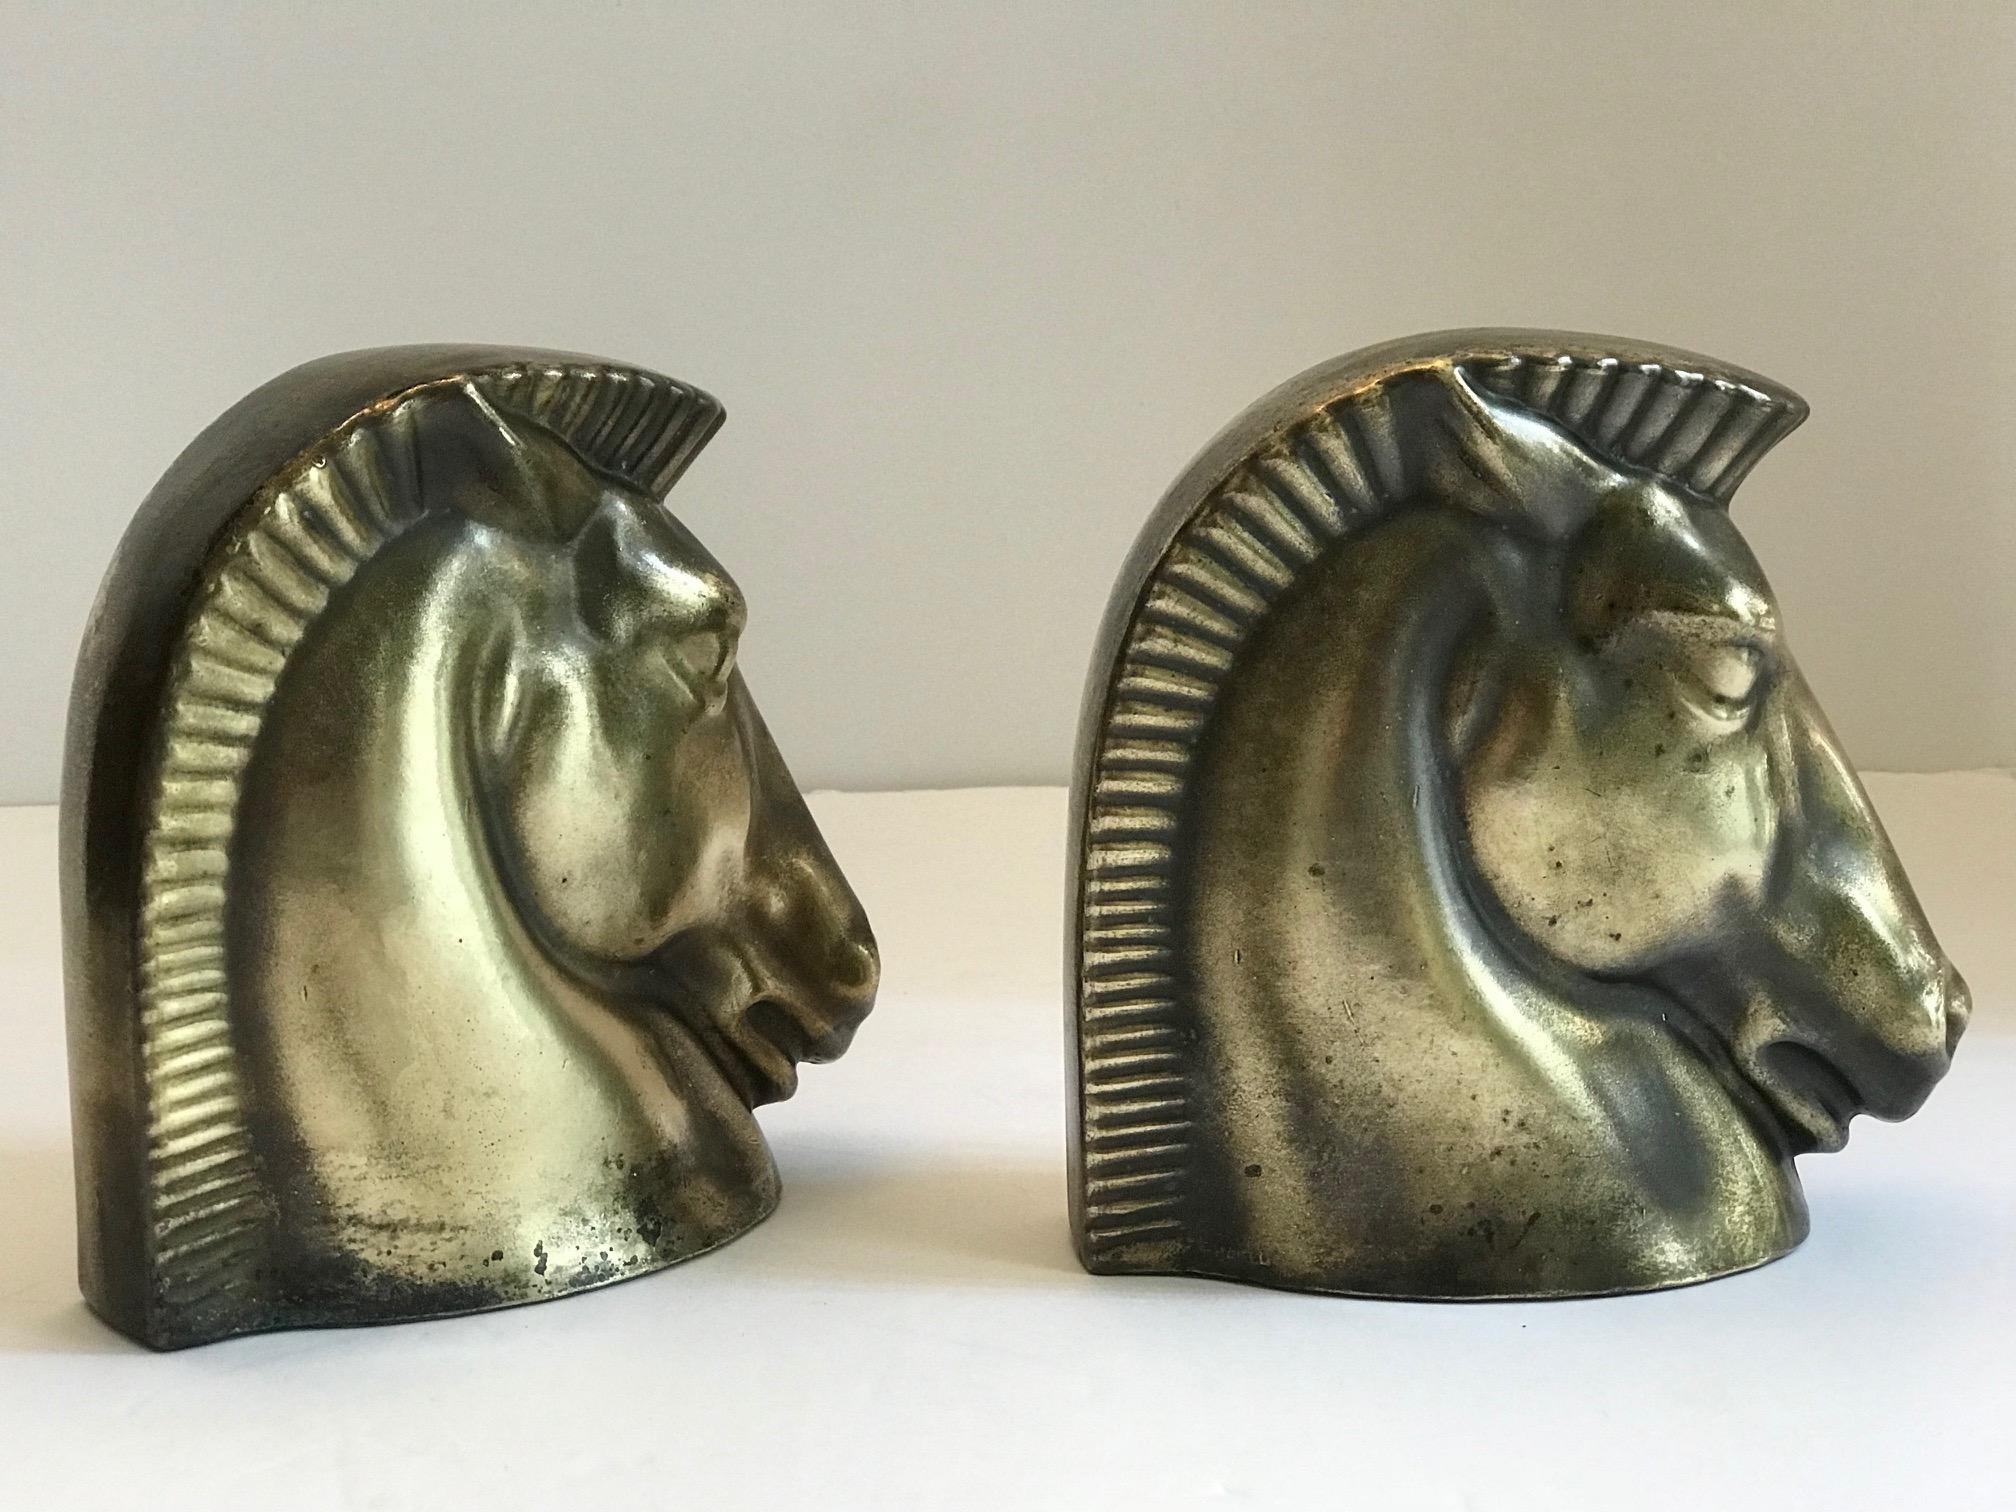 Pair of Art Deco Brass Plated Trojan Horse Bookends by Frankart 10